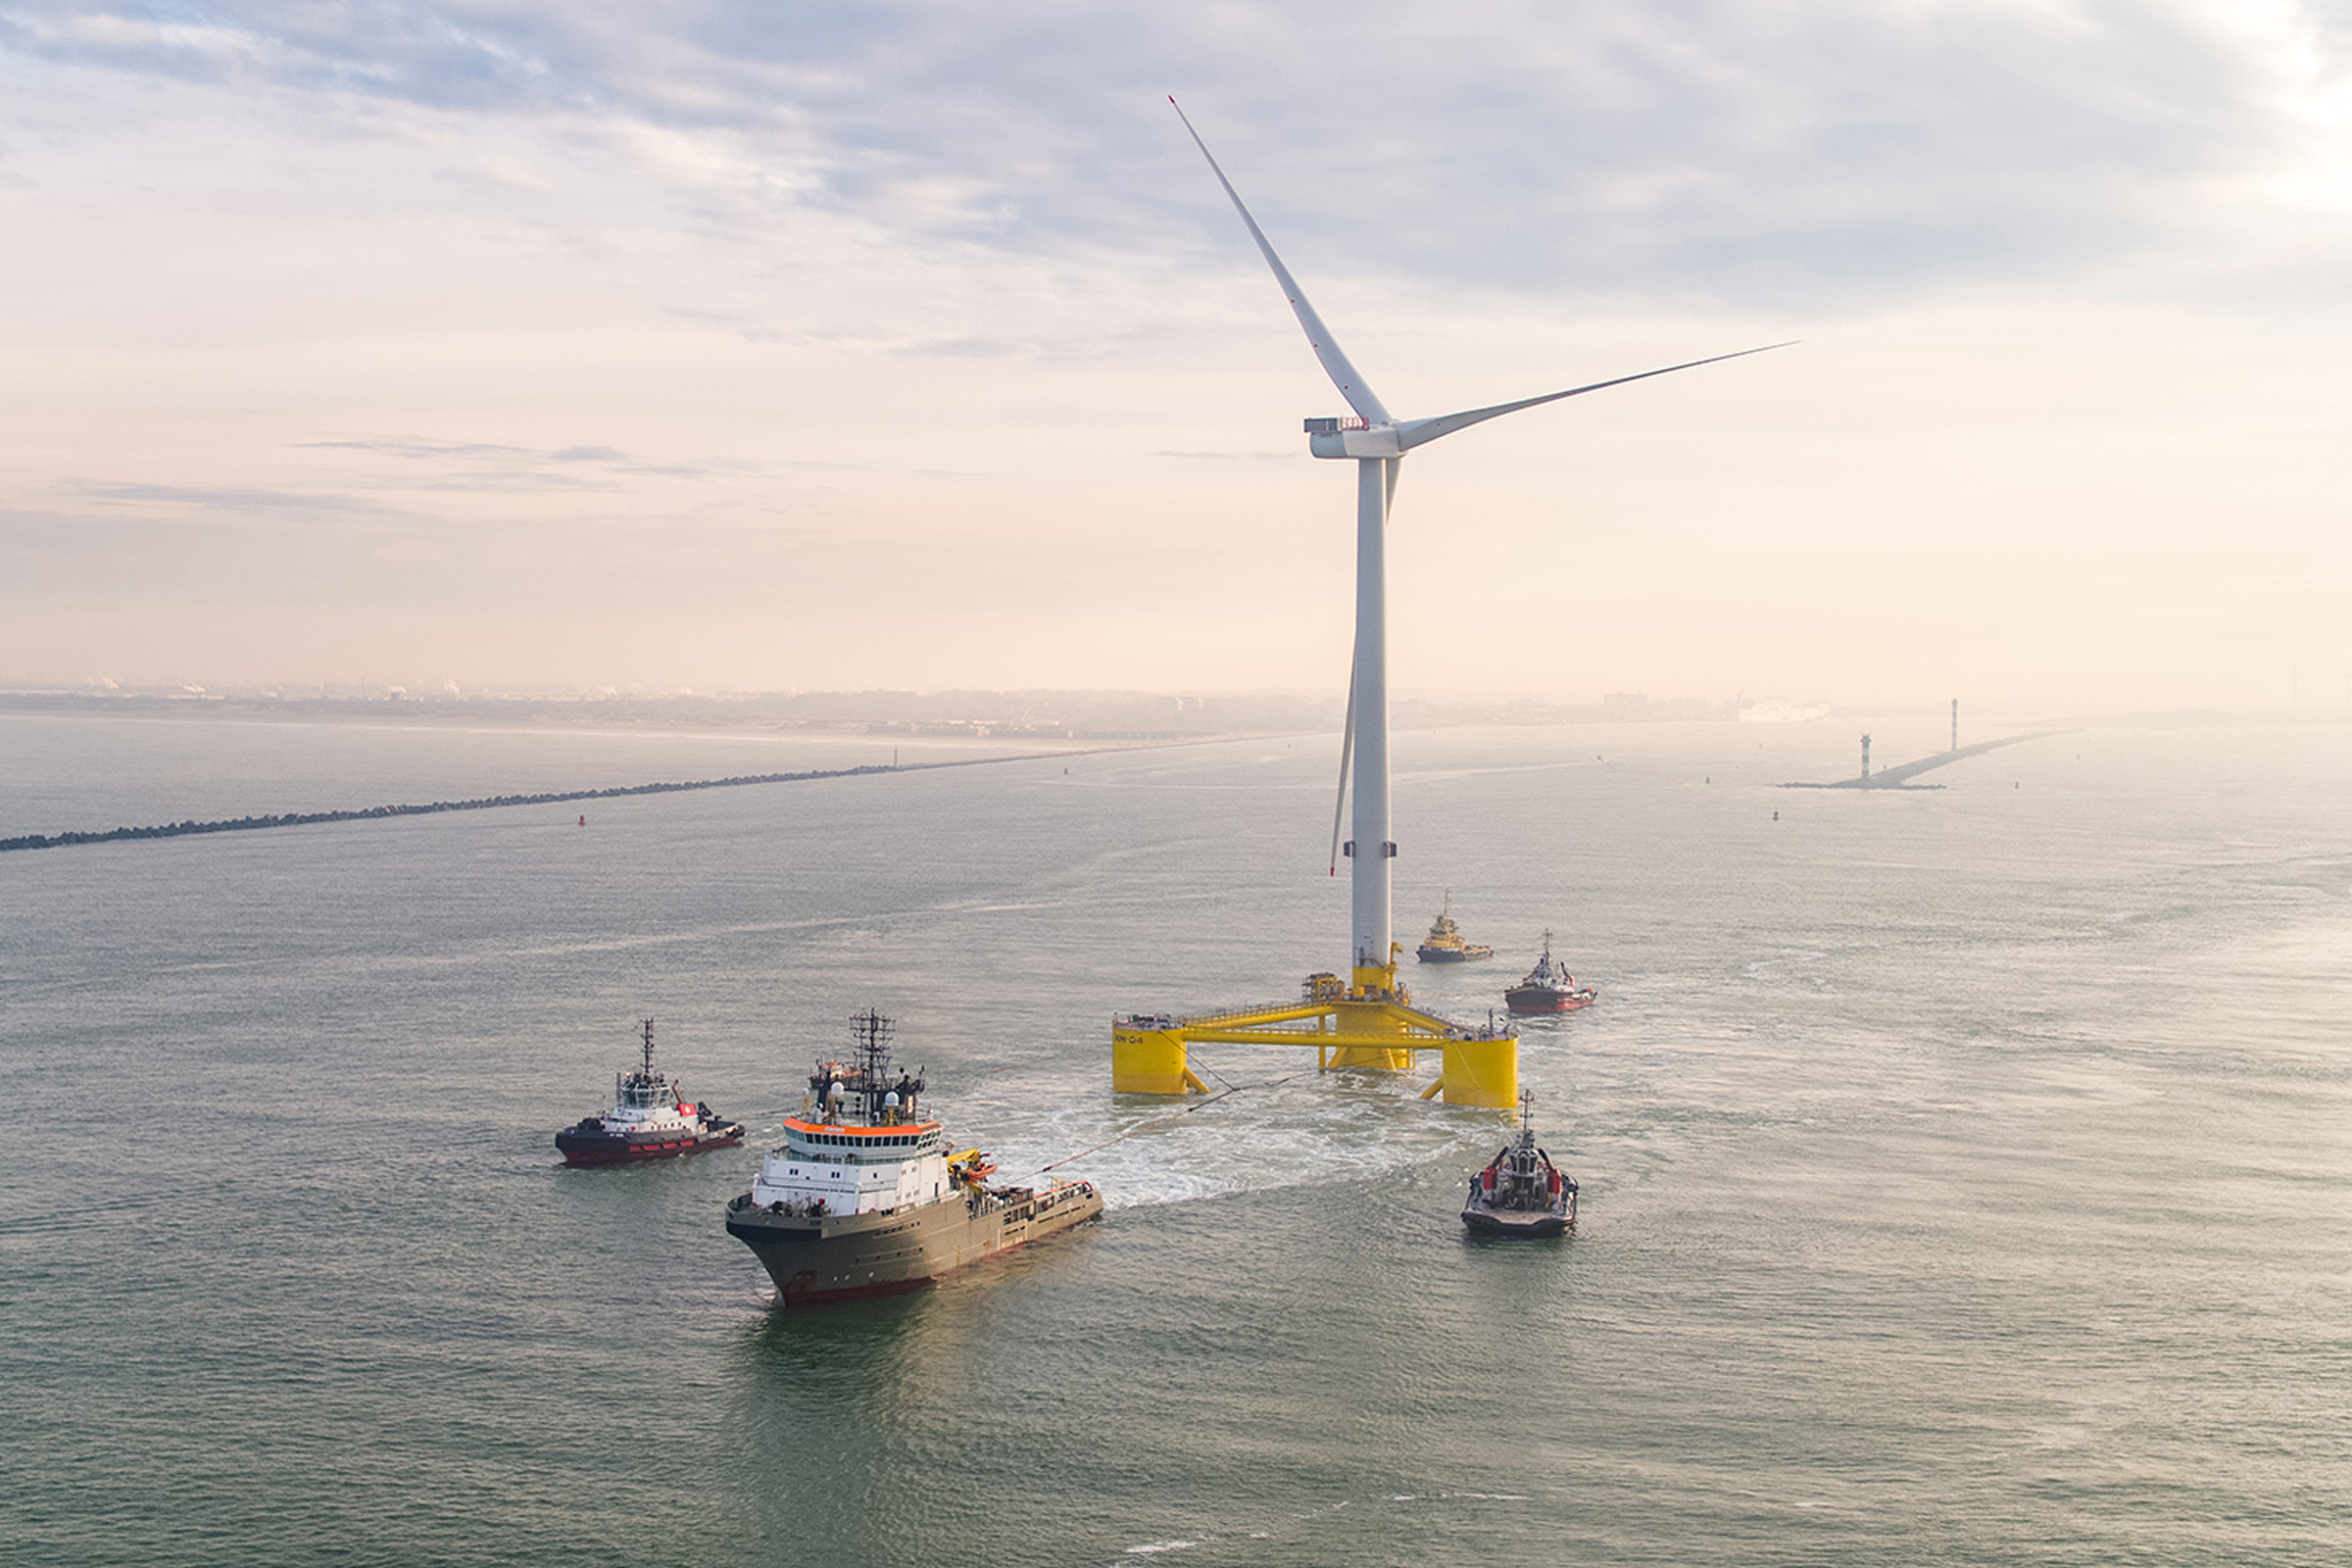 Transport of one of the floating wind turbines to the Kincardine offshore floating wind farm